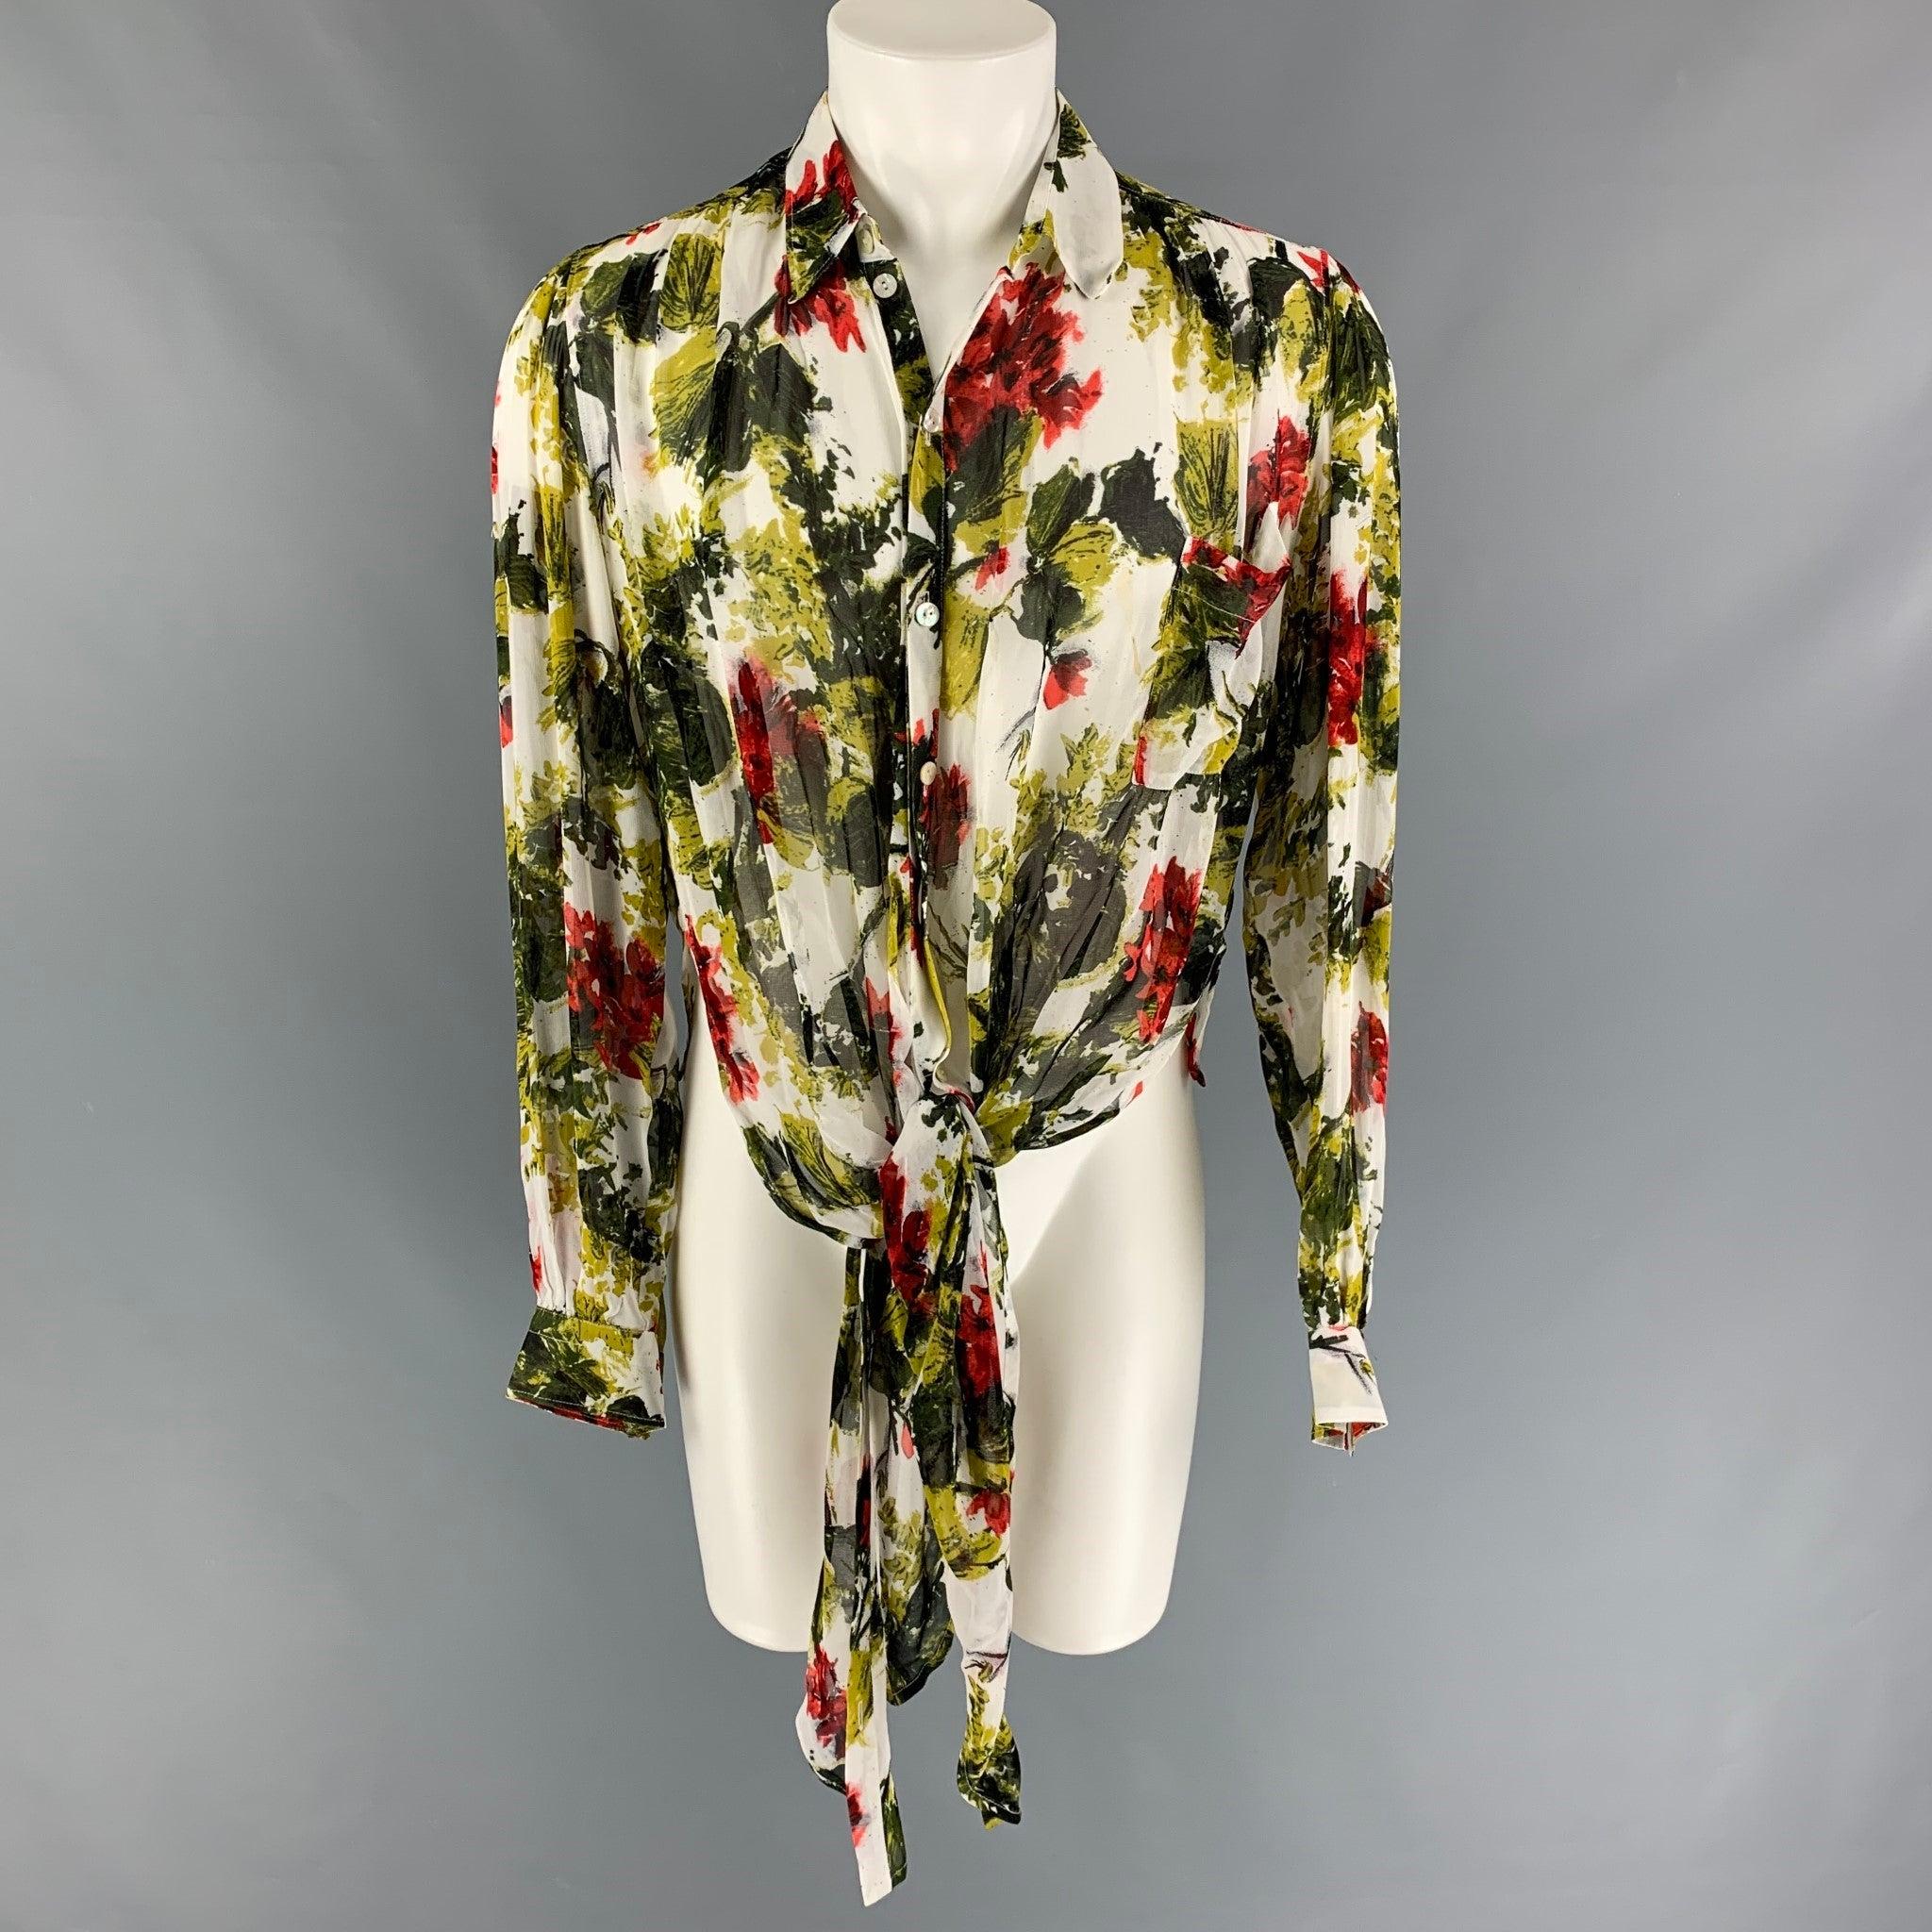 Men's JEAN PAUL GAULTIER Size XL Green Multi-Color Abstract Floral Long Sleeve Shirt